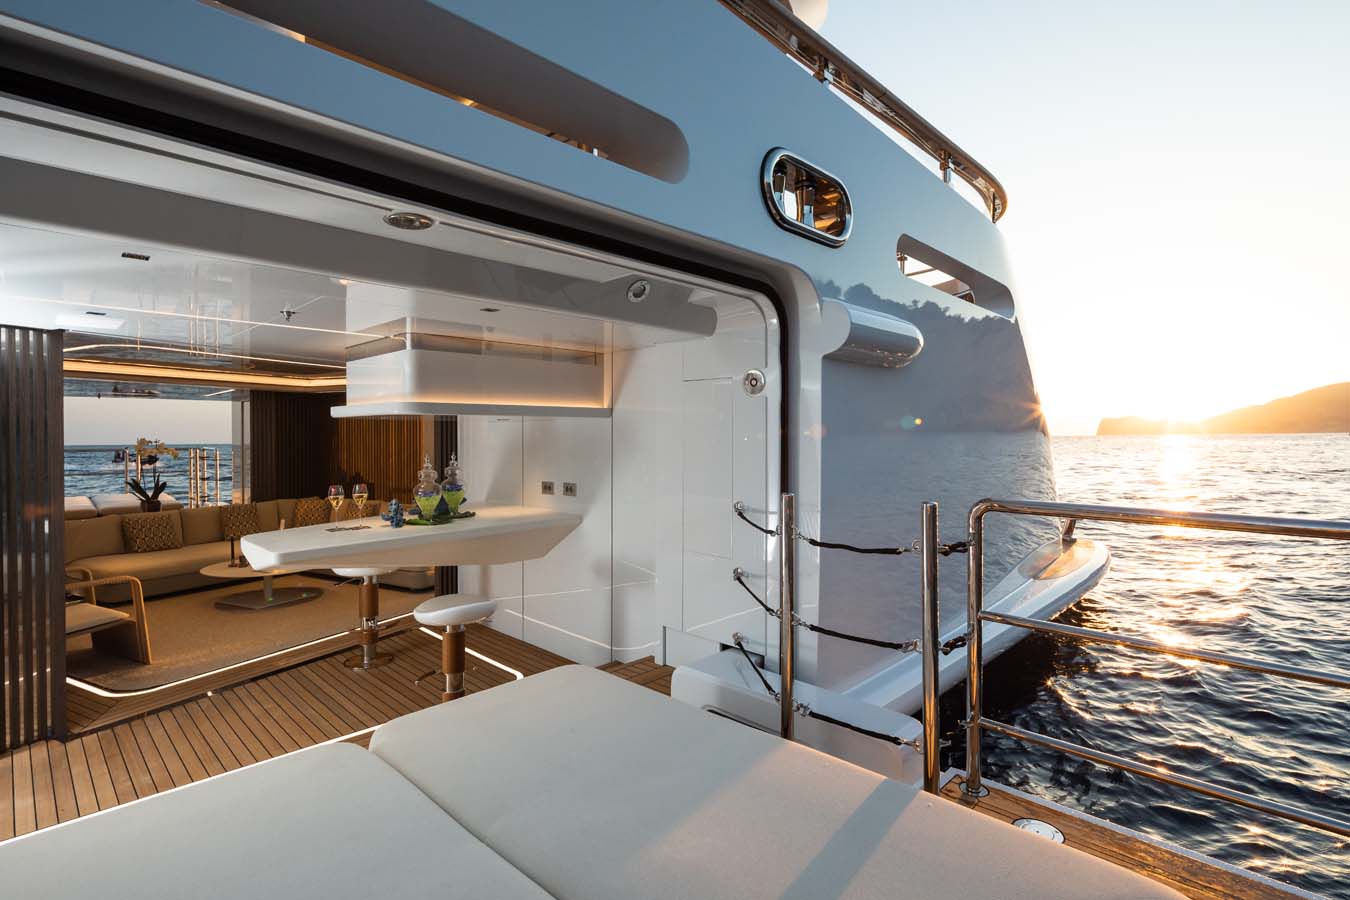 Beach Club Open To Both Sides Of The Yacht